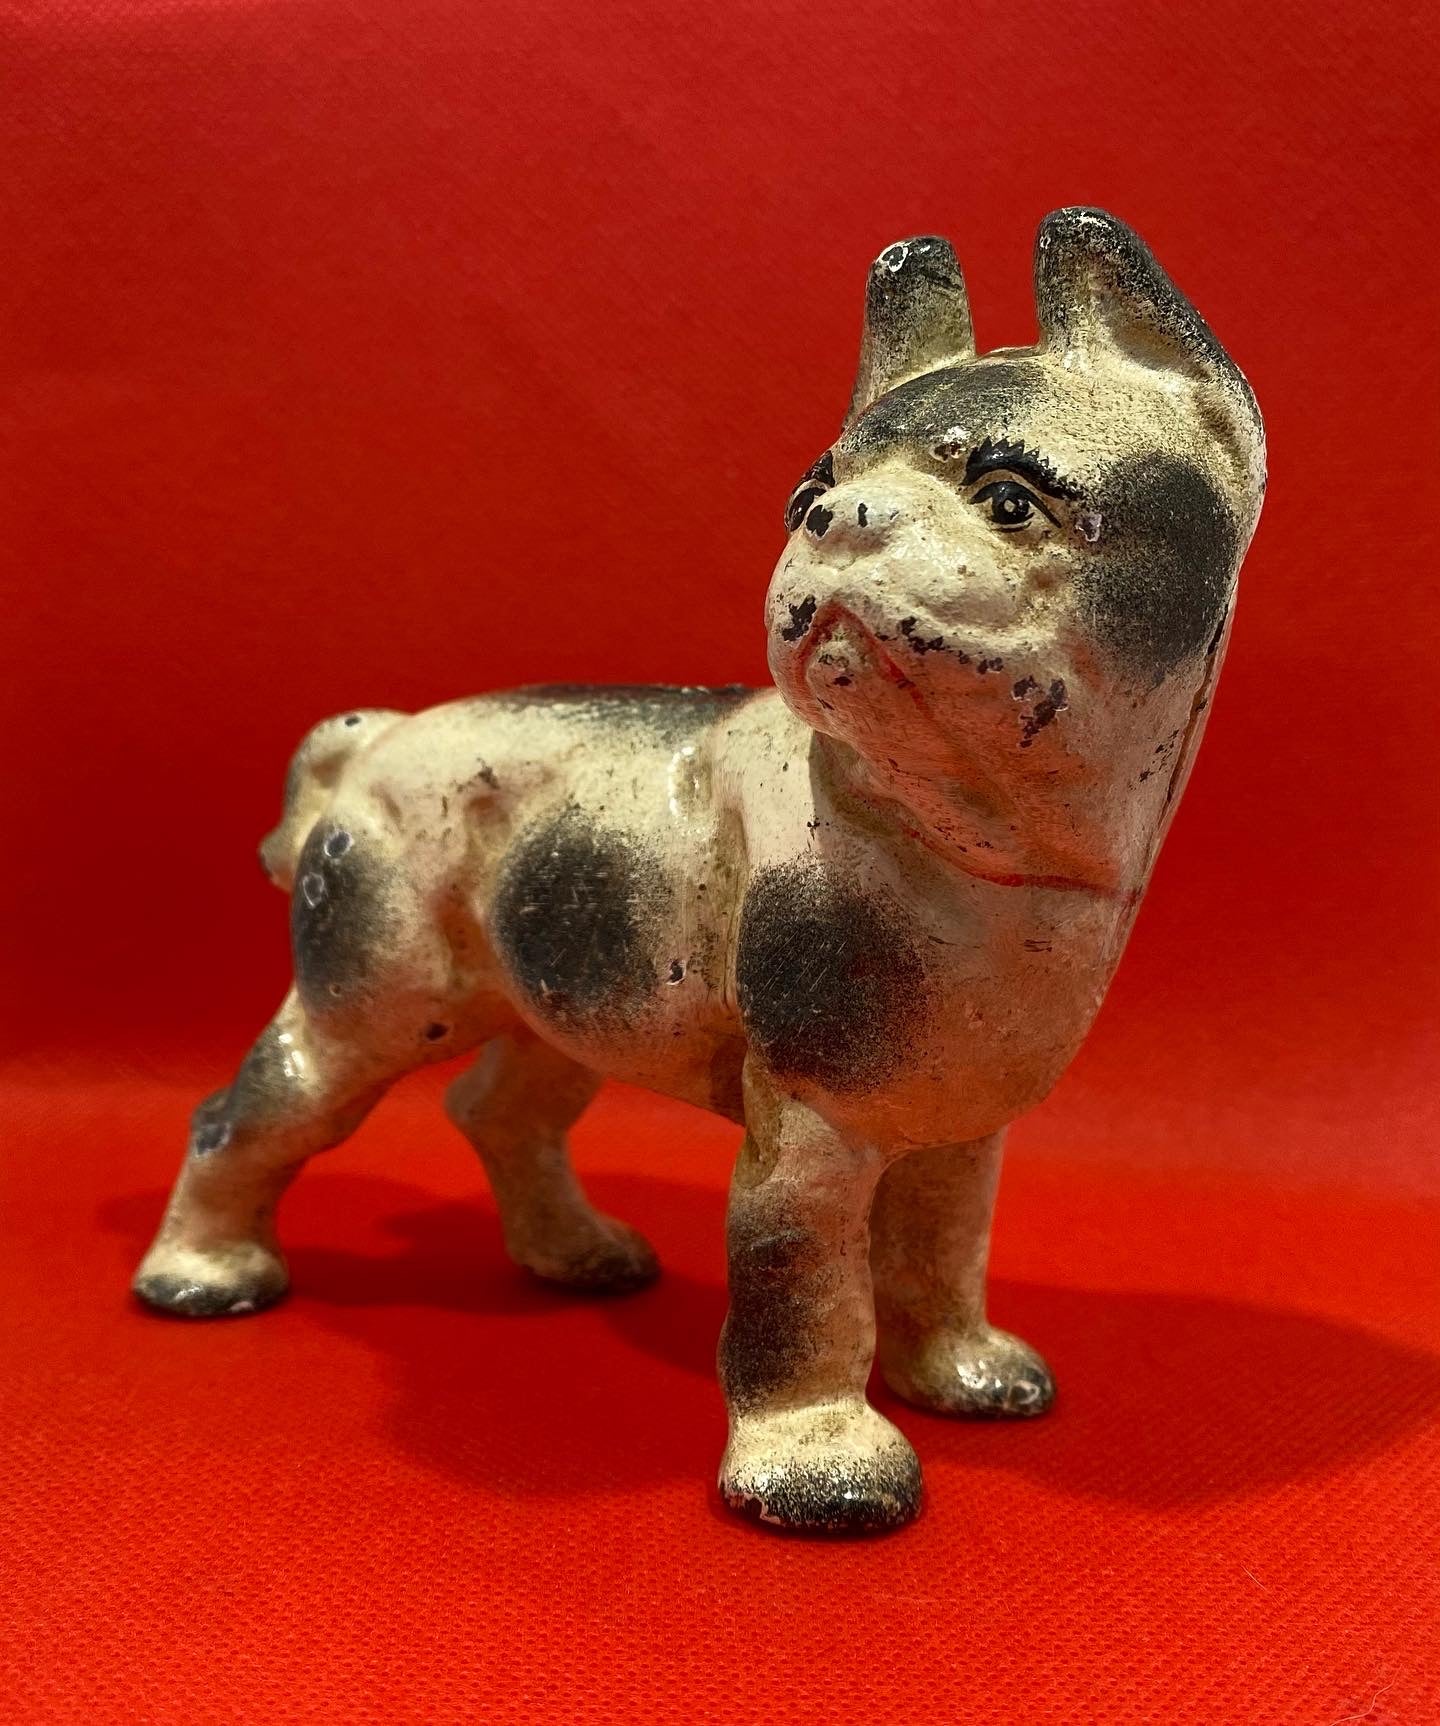 Antique, original, Cast Iron White French Bulldog seated in profile coin bank, made by Hubley 1910s Very rare piece.